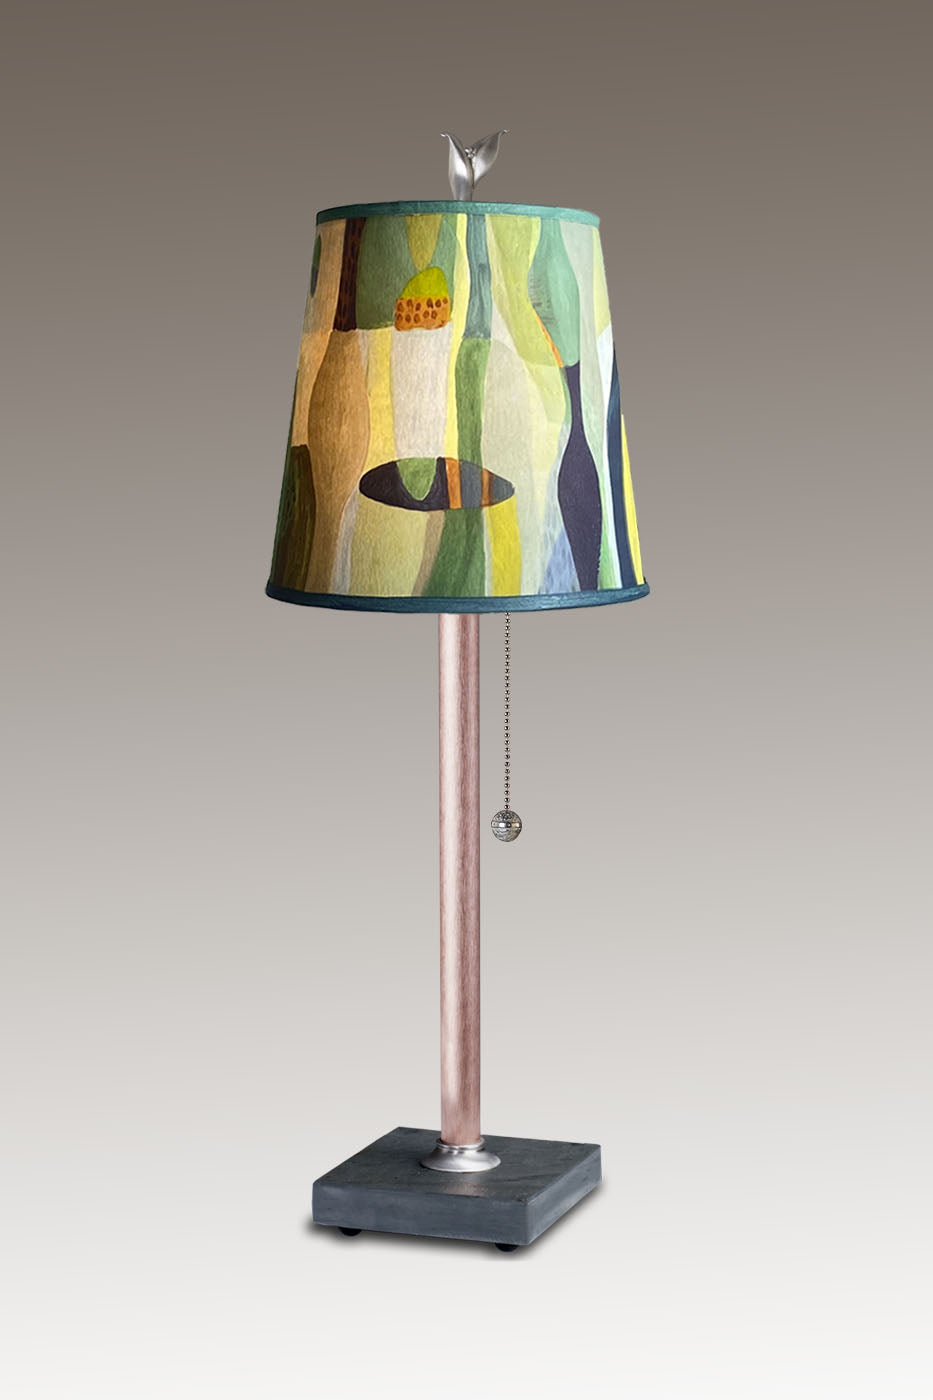 Janna Ugone &amp; Co Table Lamp Copper Table Lamp with Small Drum Shade in Riviera in Citrus